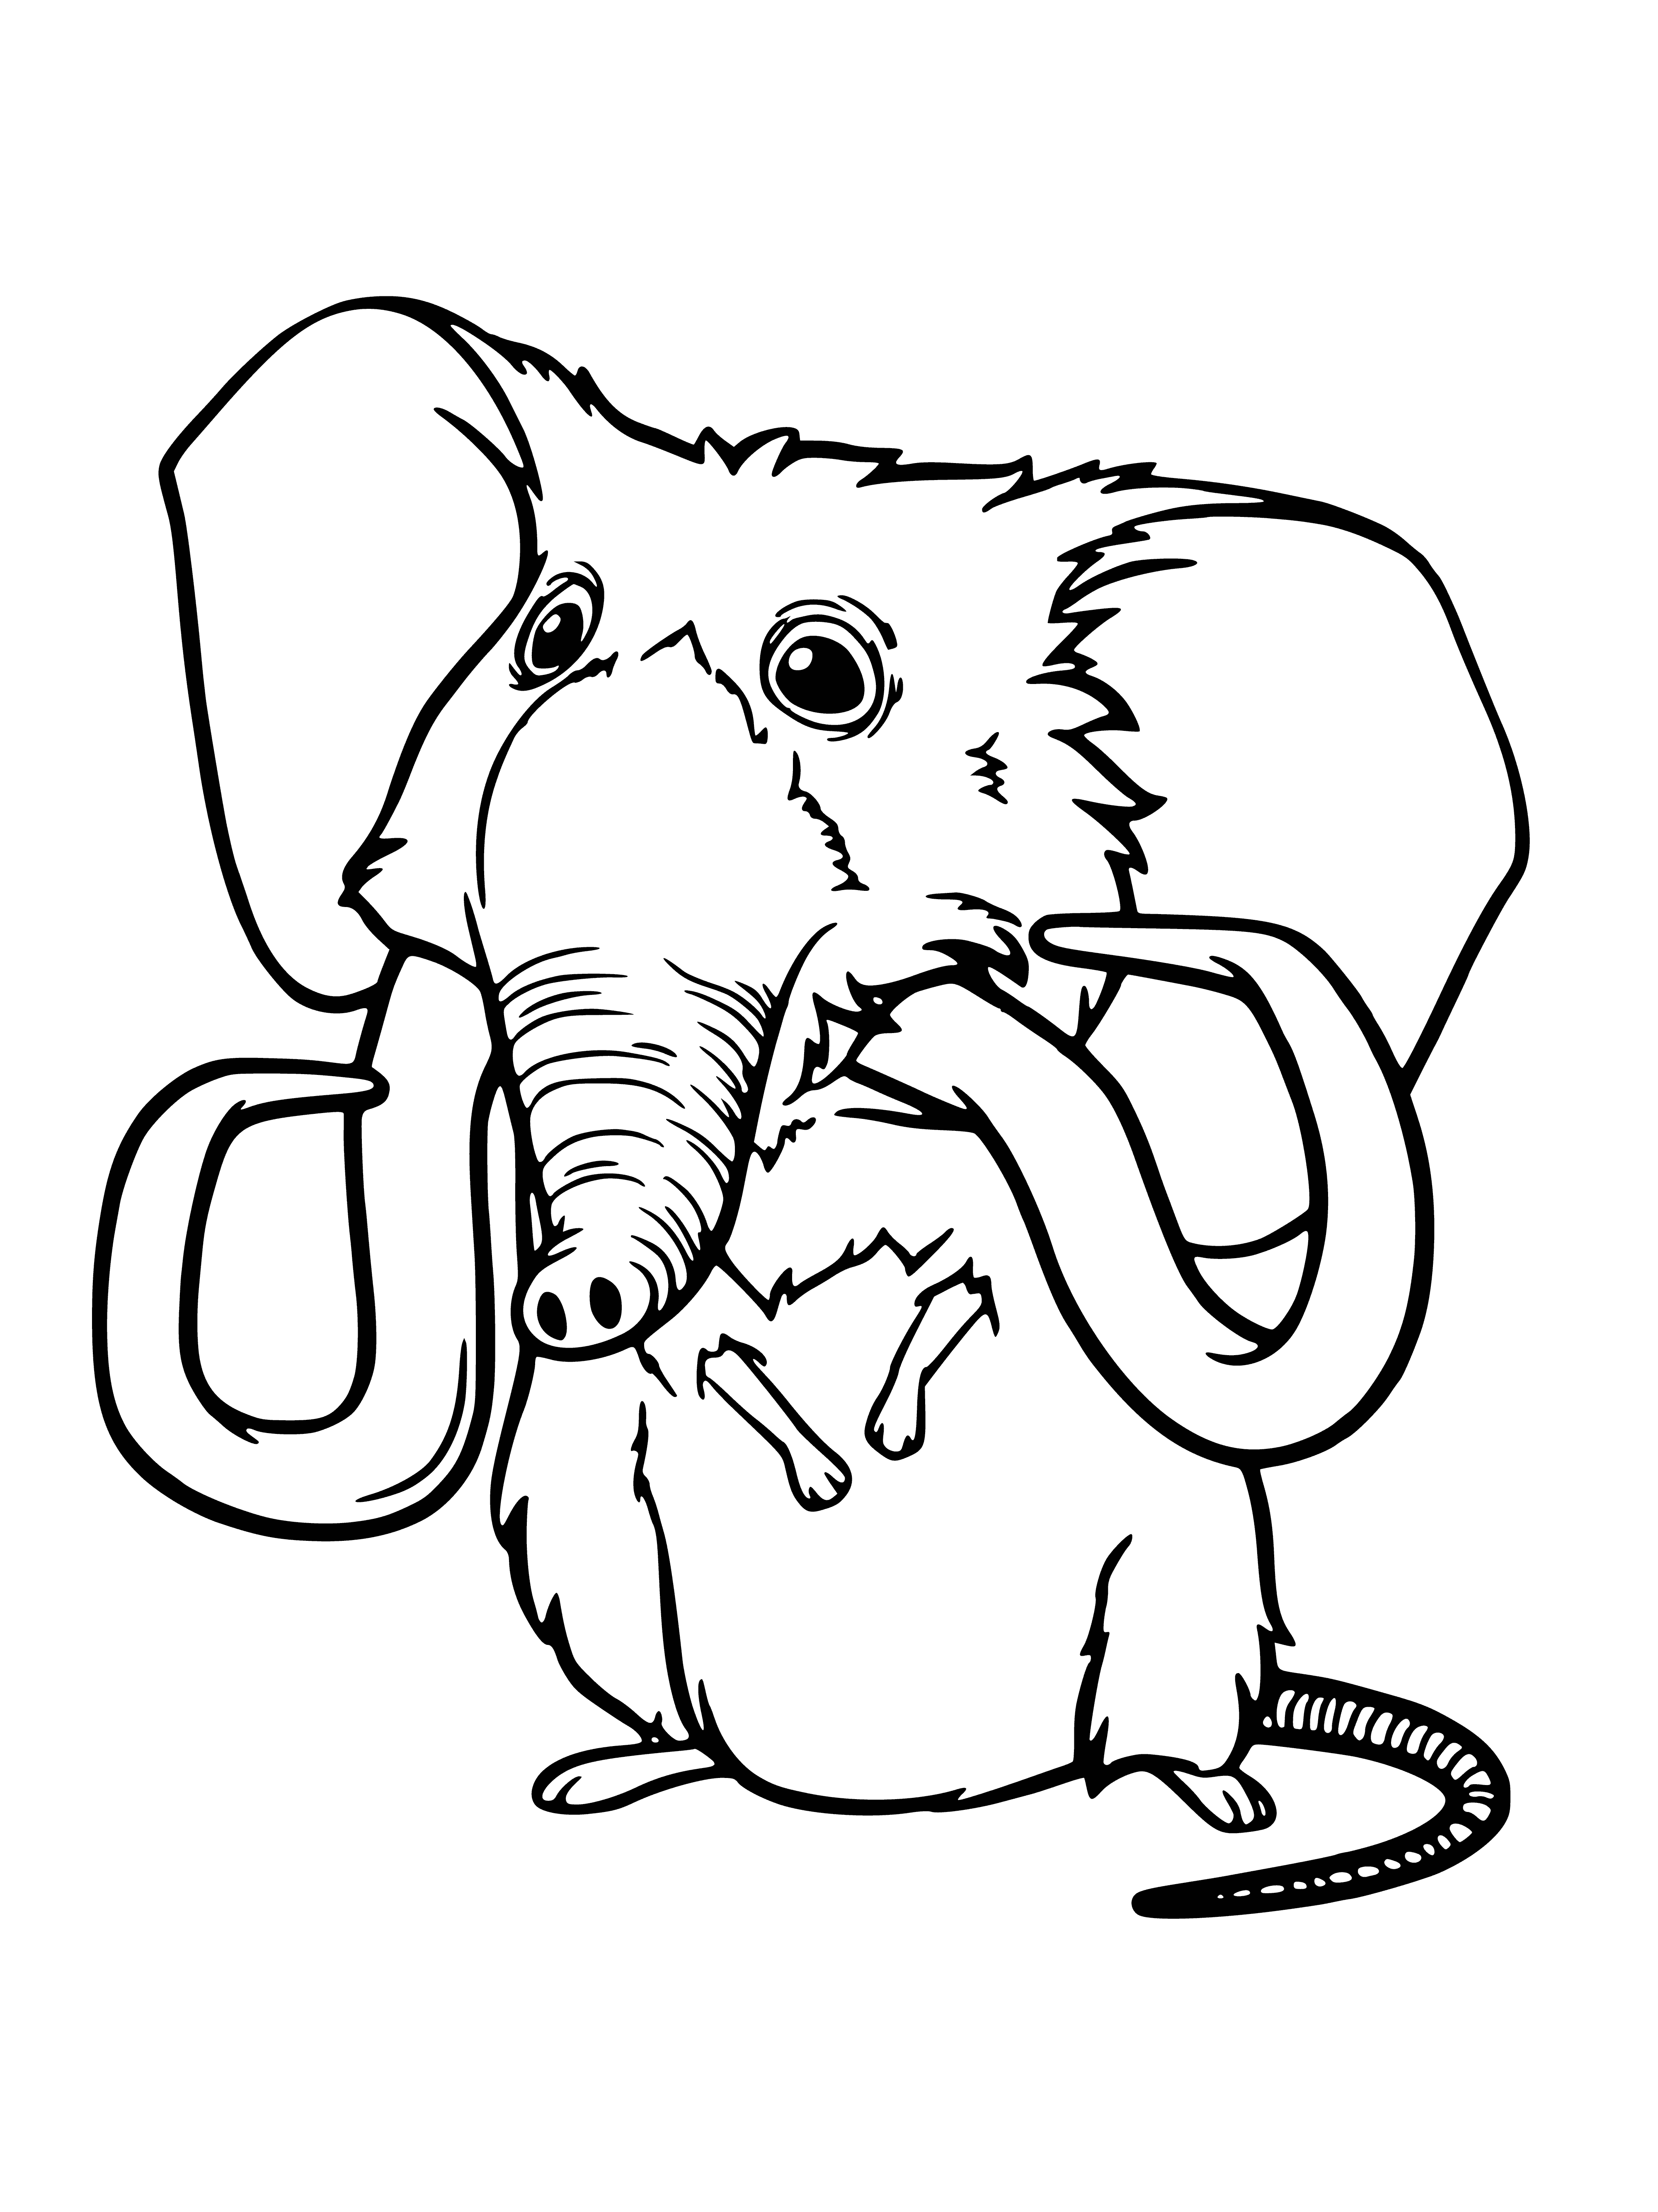 coloring page: Adorable rodent-like creature with gray fur, pink nose, big black eyes, and holding two acorns, standing on its hind legs.